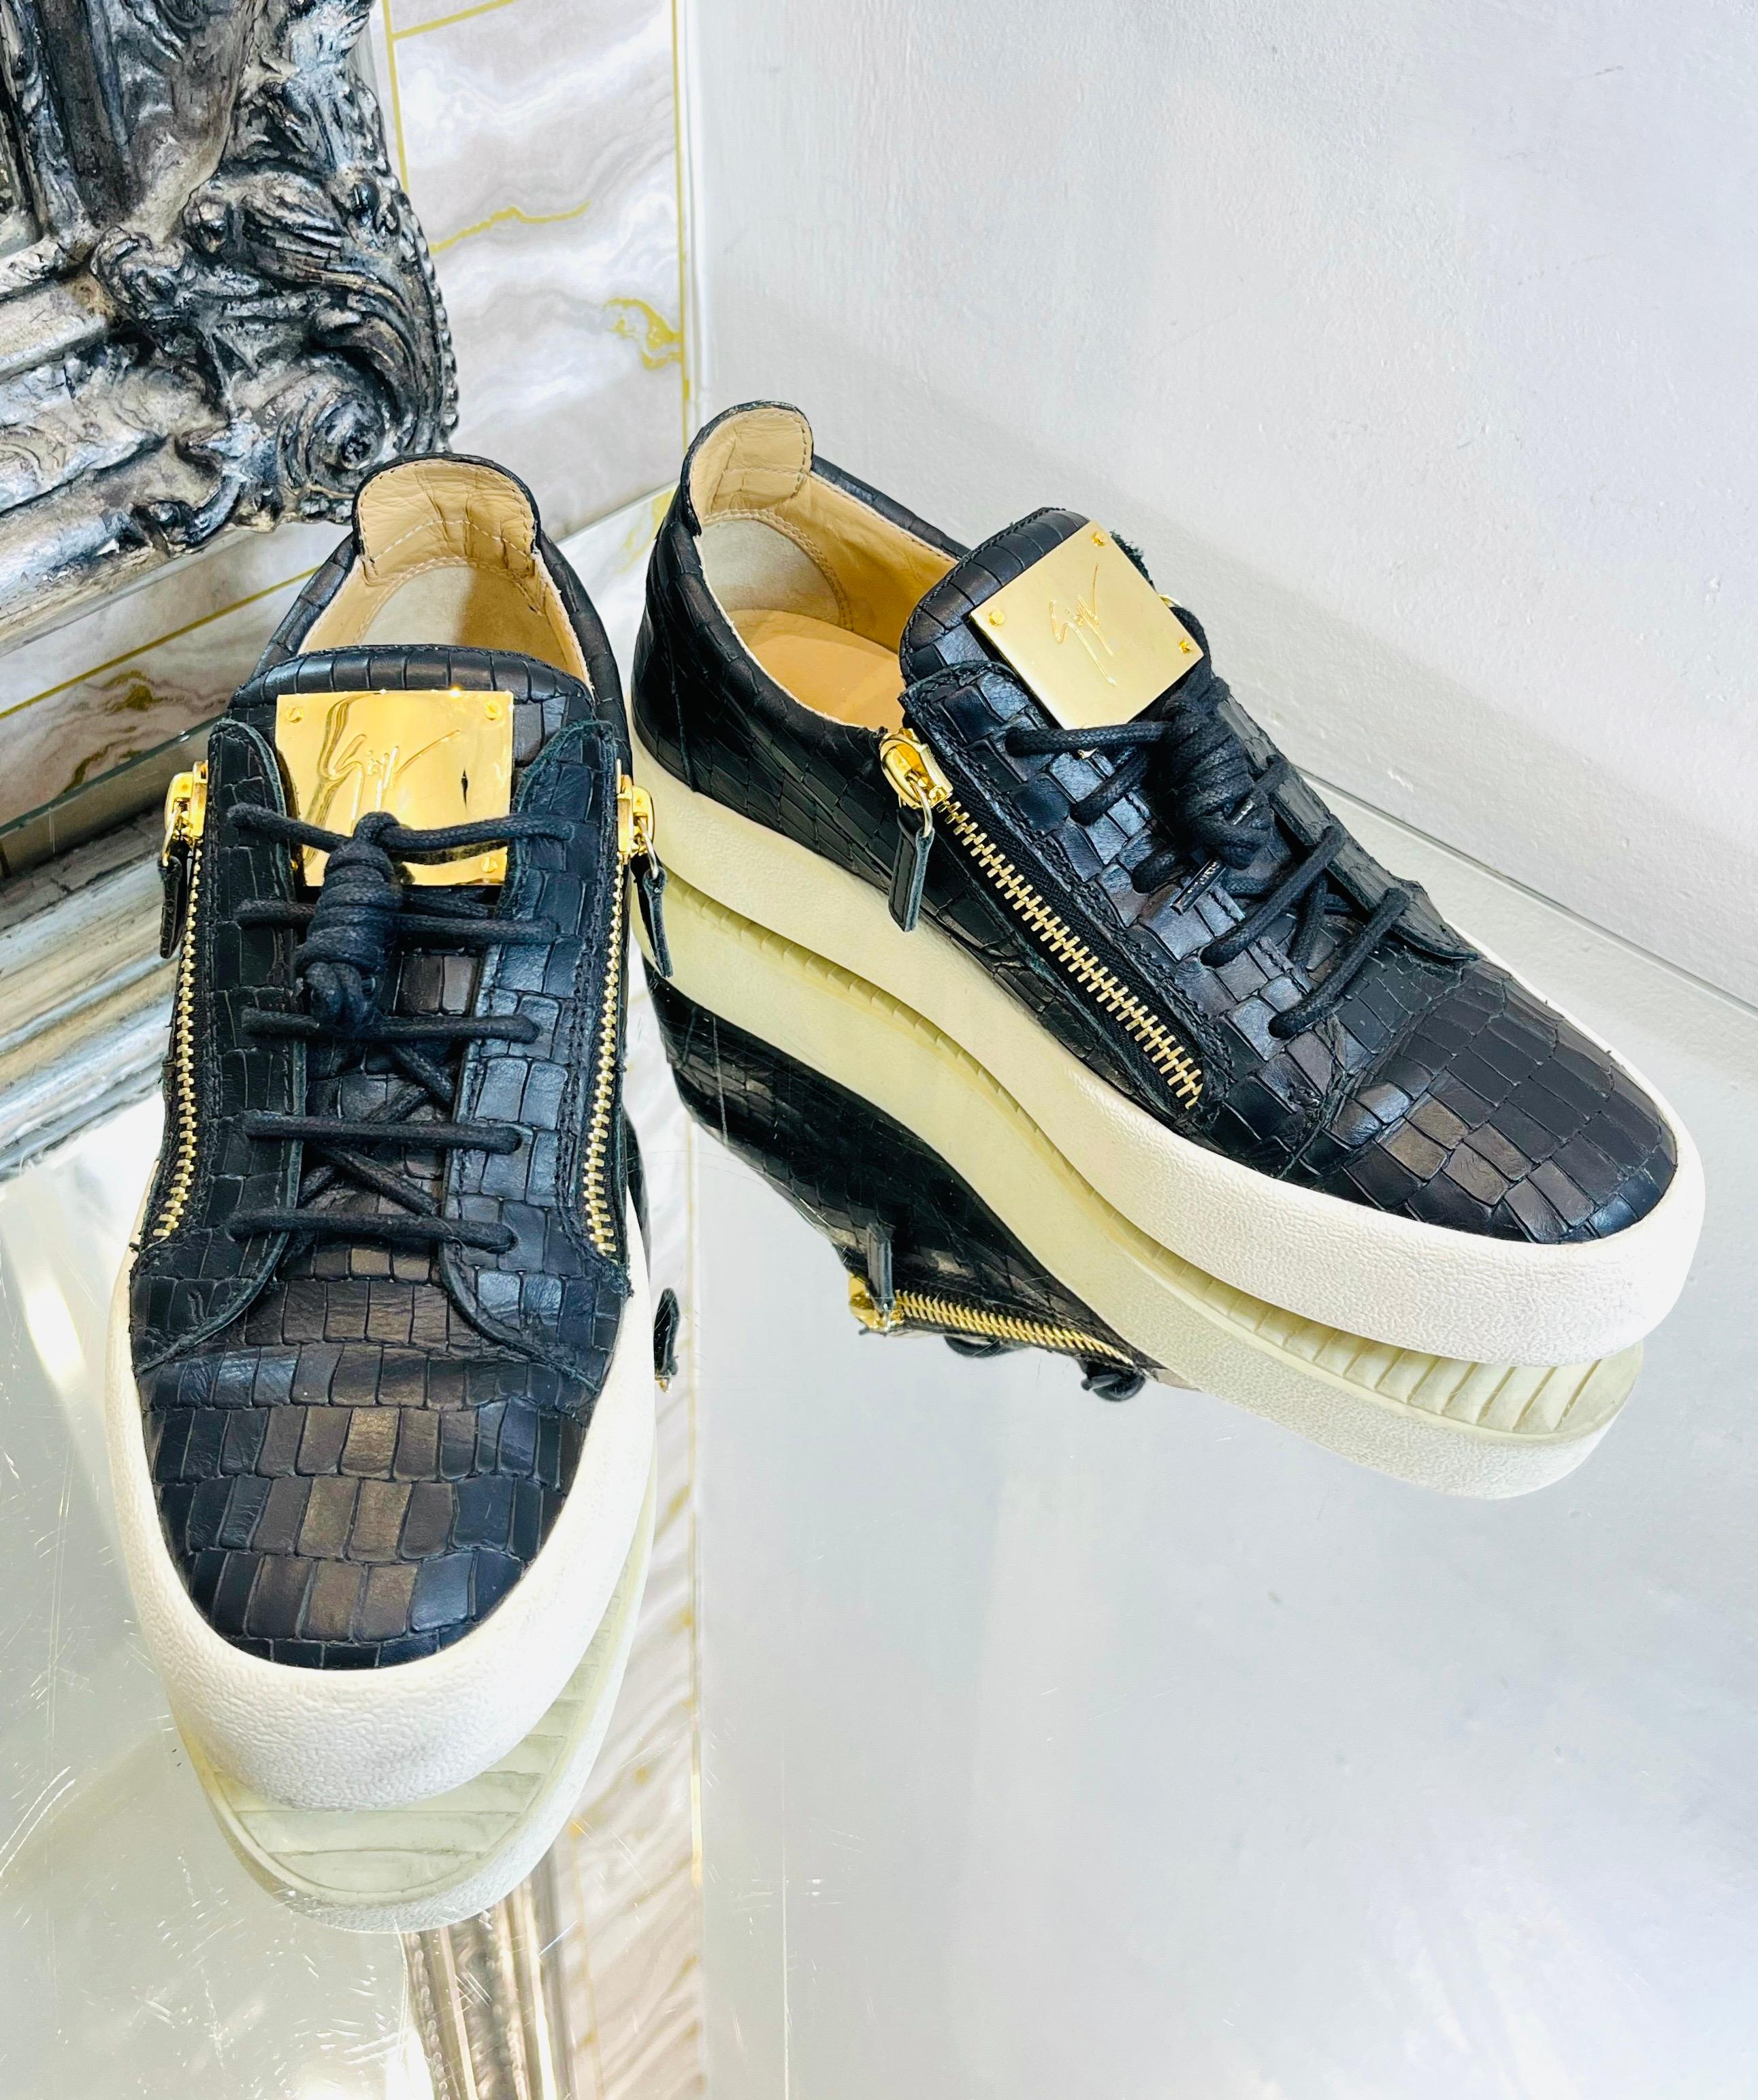 Black Giuseppe Zanotti Croc Embossed Leather Sneakers For Sale